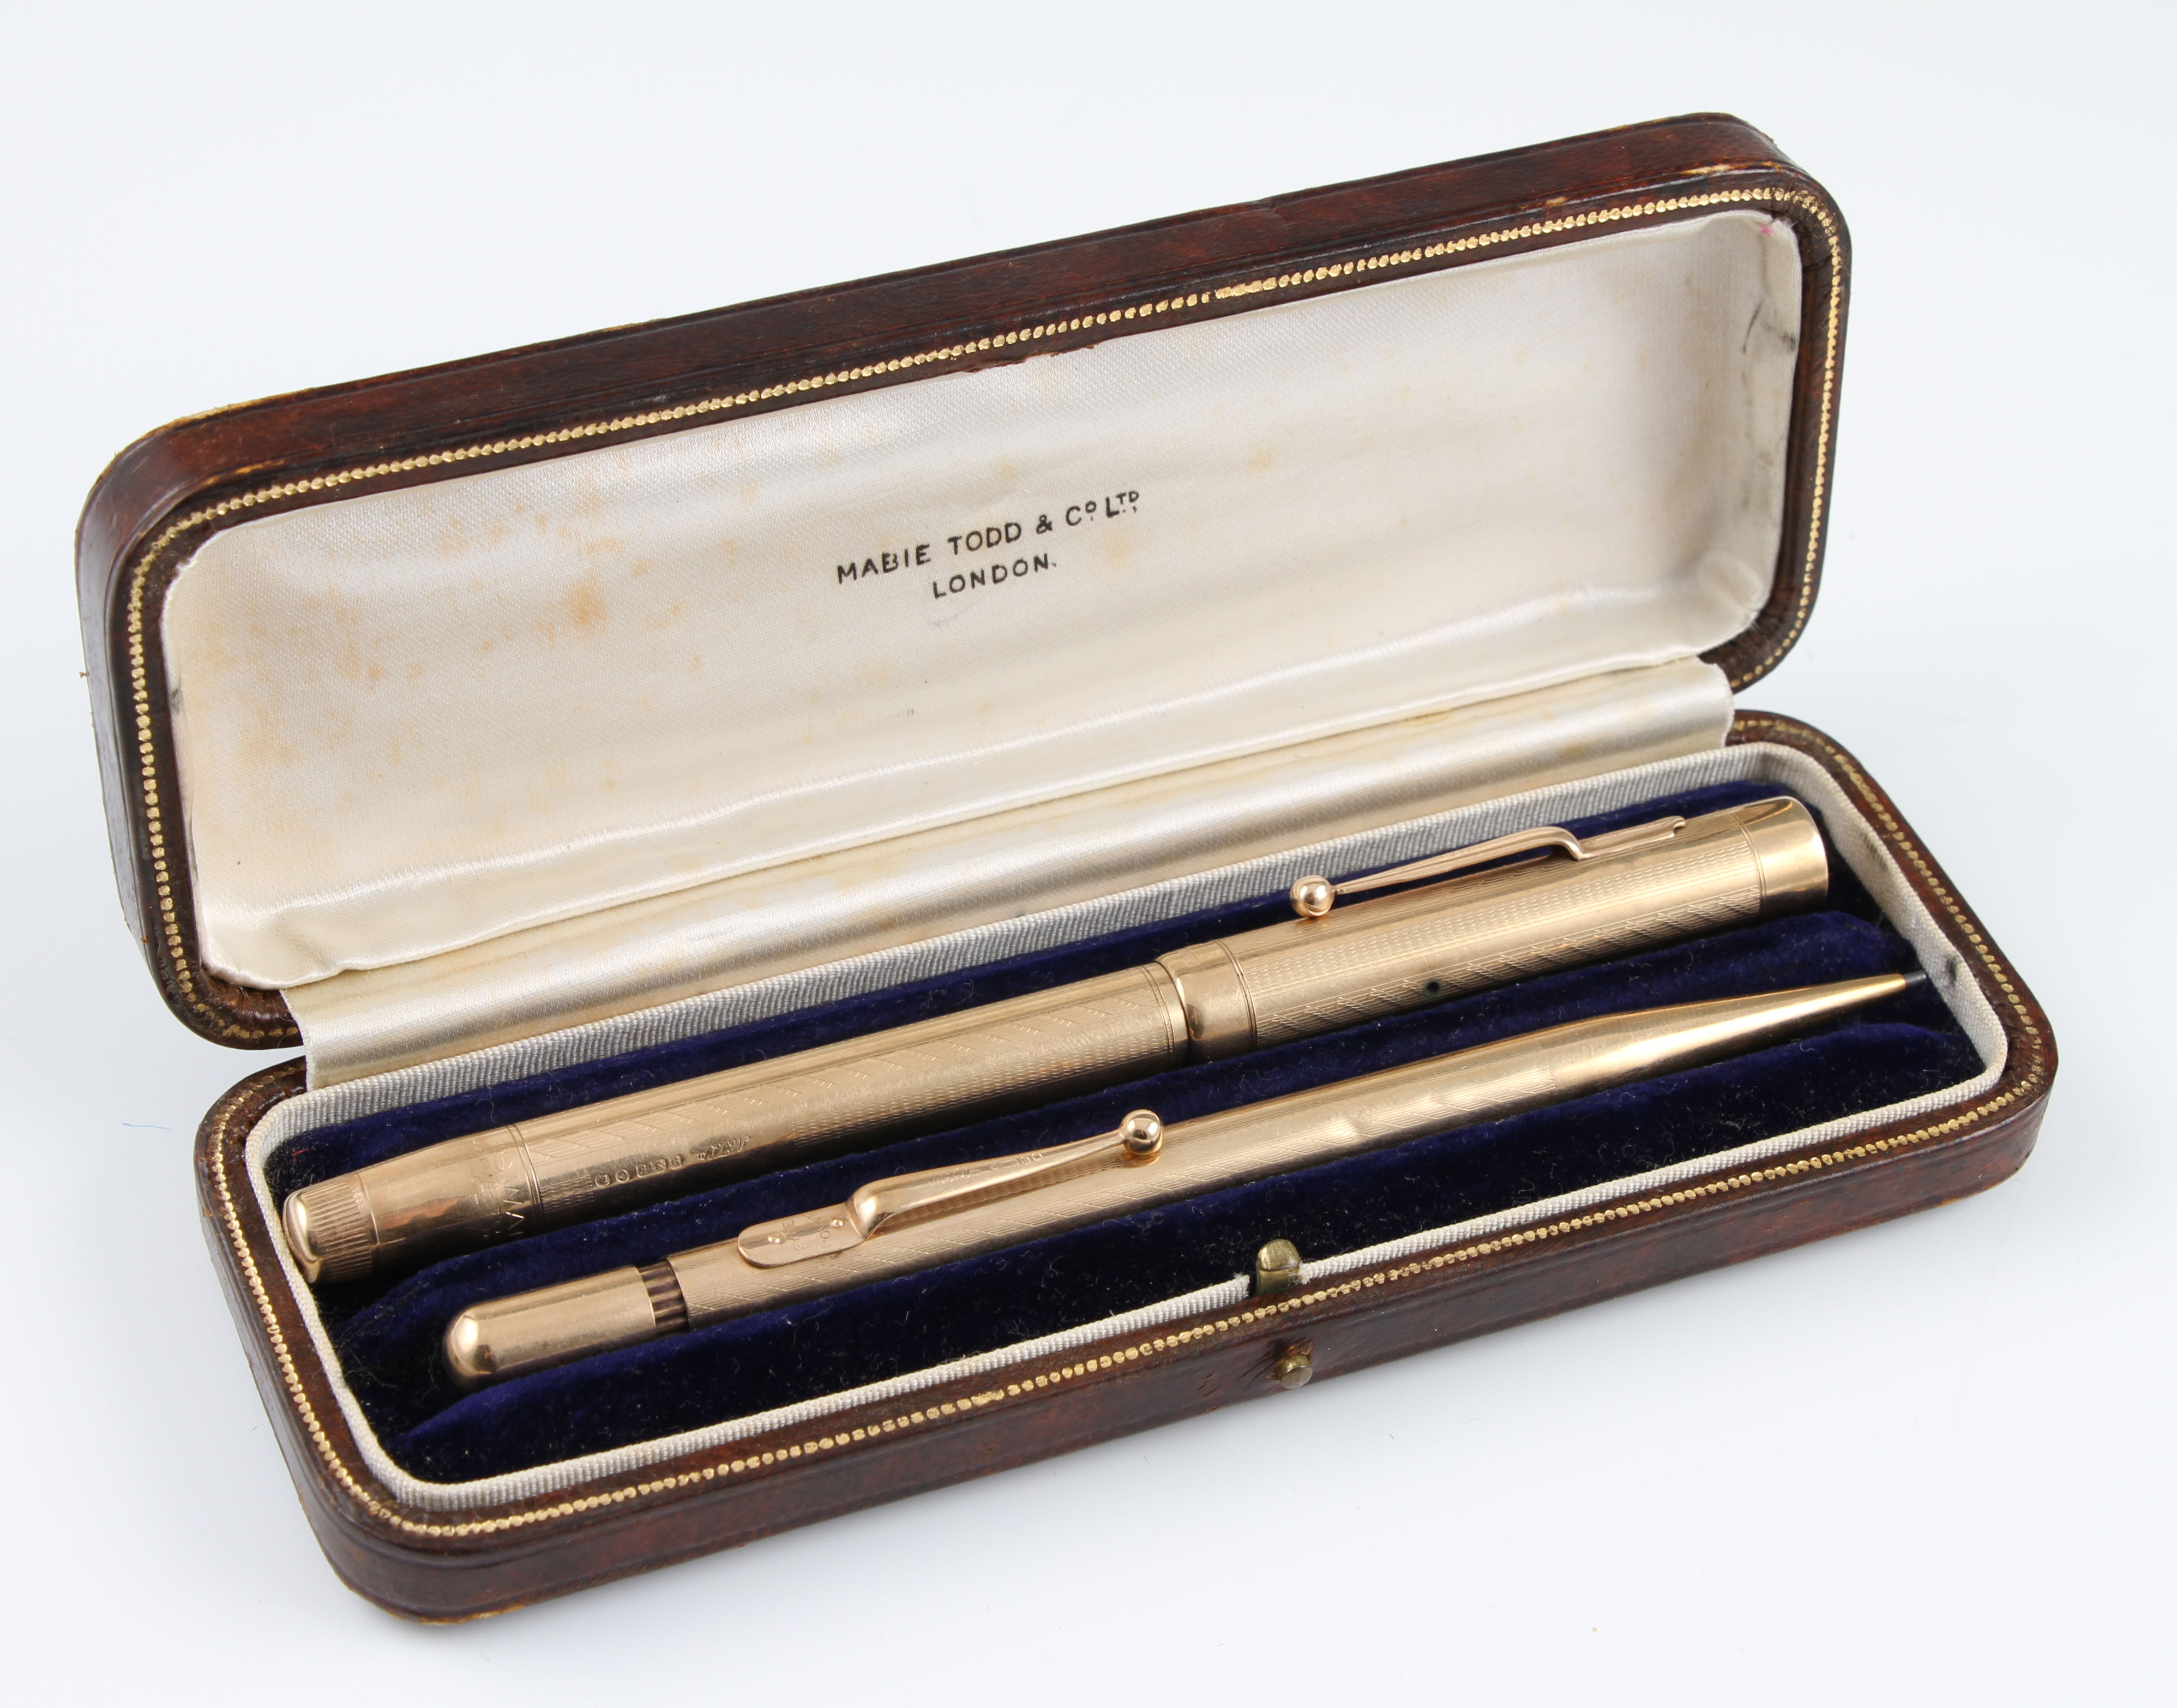 A 9ct yellow gold Swan by Mabie Todd & Co. fountain pen and propelling pencil, engine turned